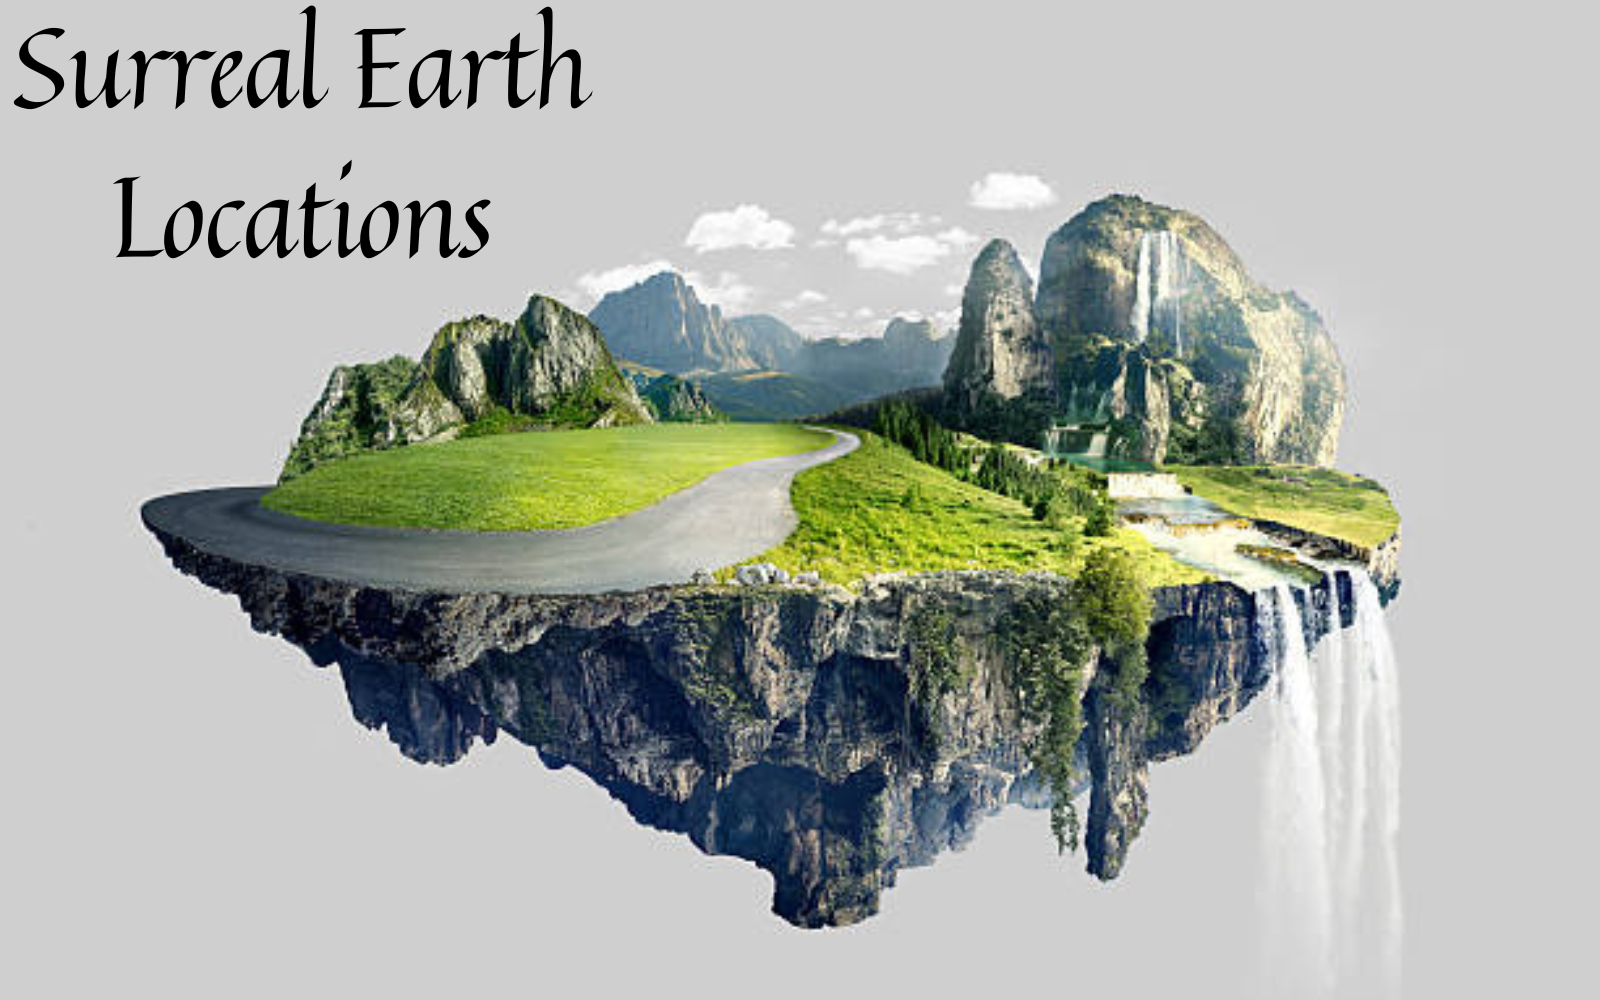 Surreal Earth Locations